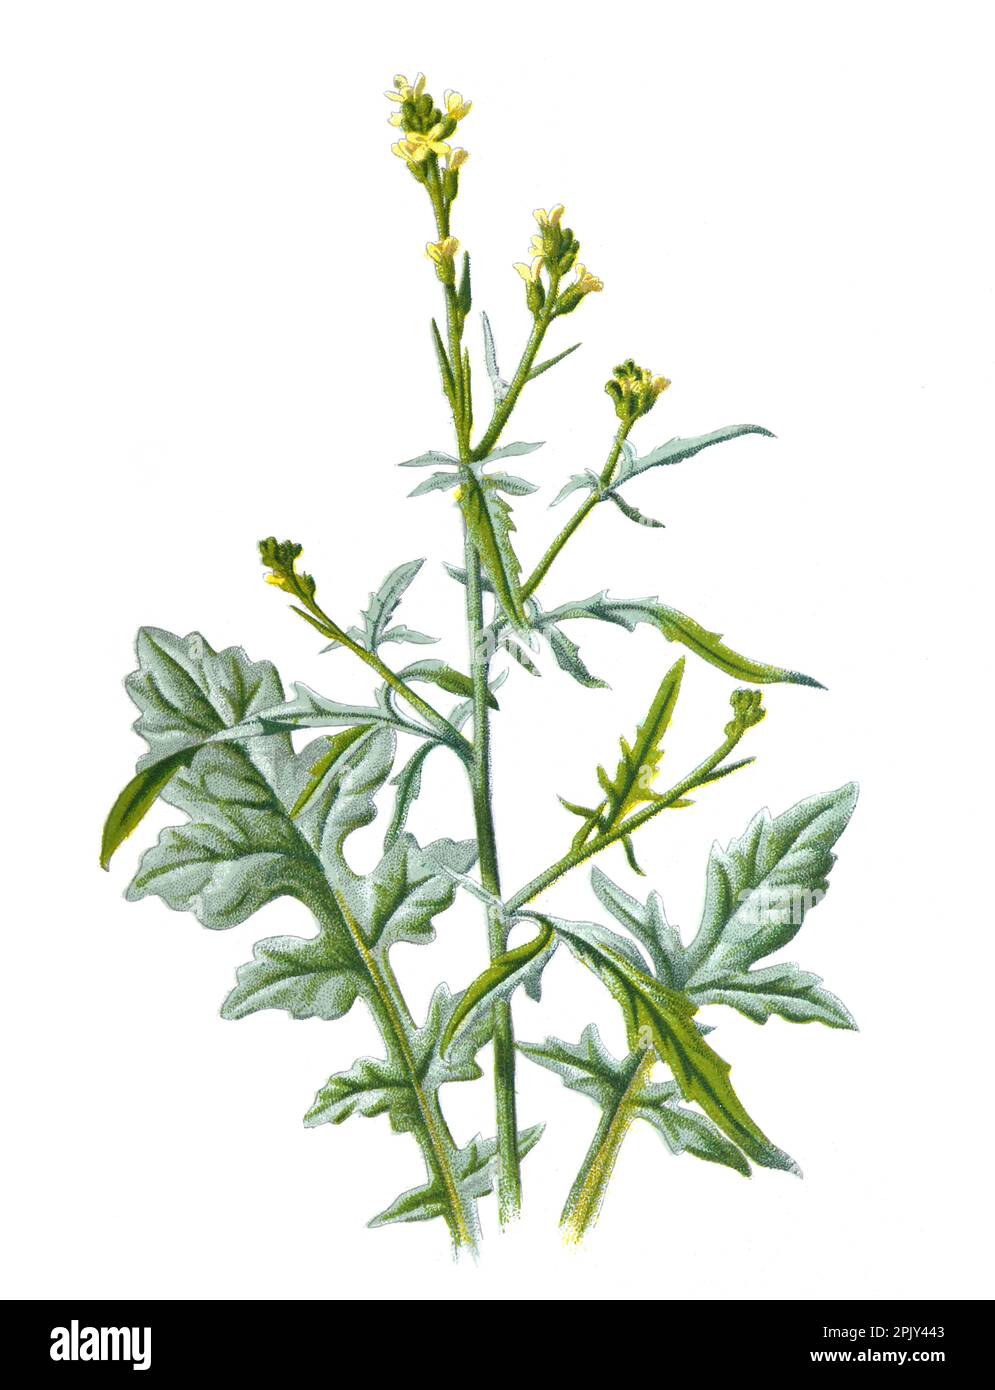 Hedge mustard or Sisymbrium officinale, or the hedge mustard family of Brassicaceae flower. Vintage hand drawn field flowers illustration. Stock Photo